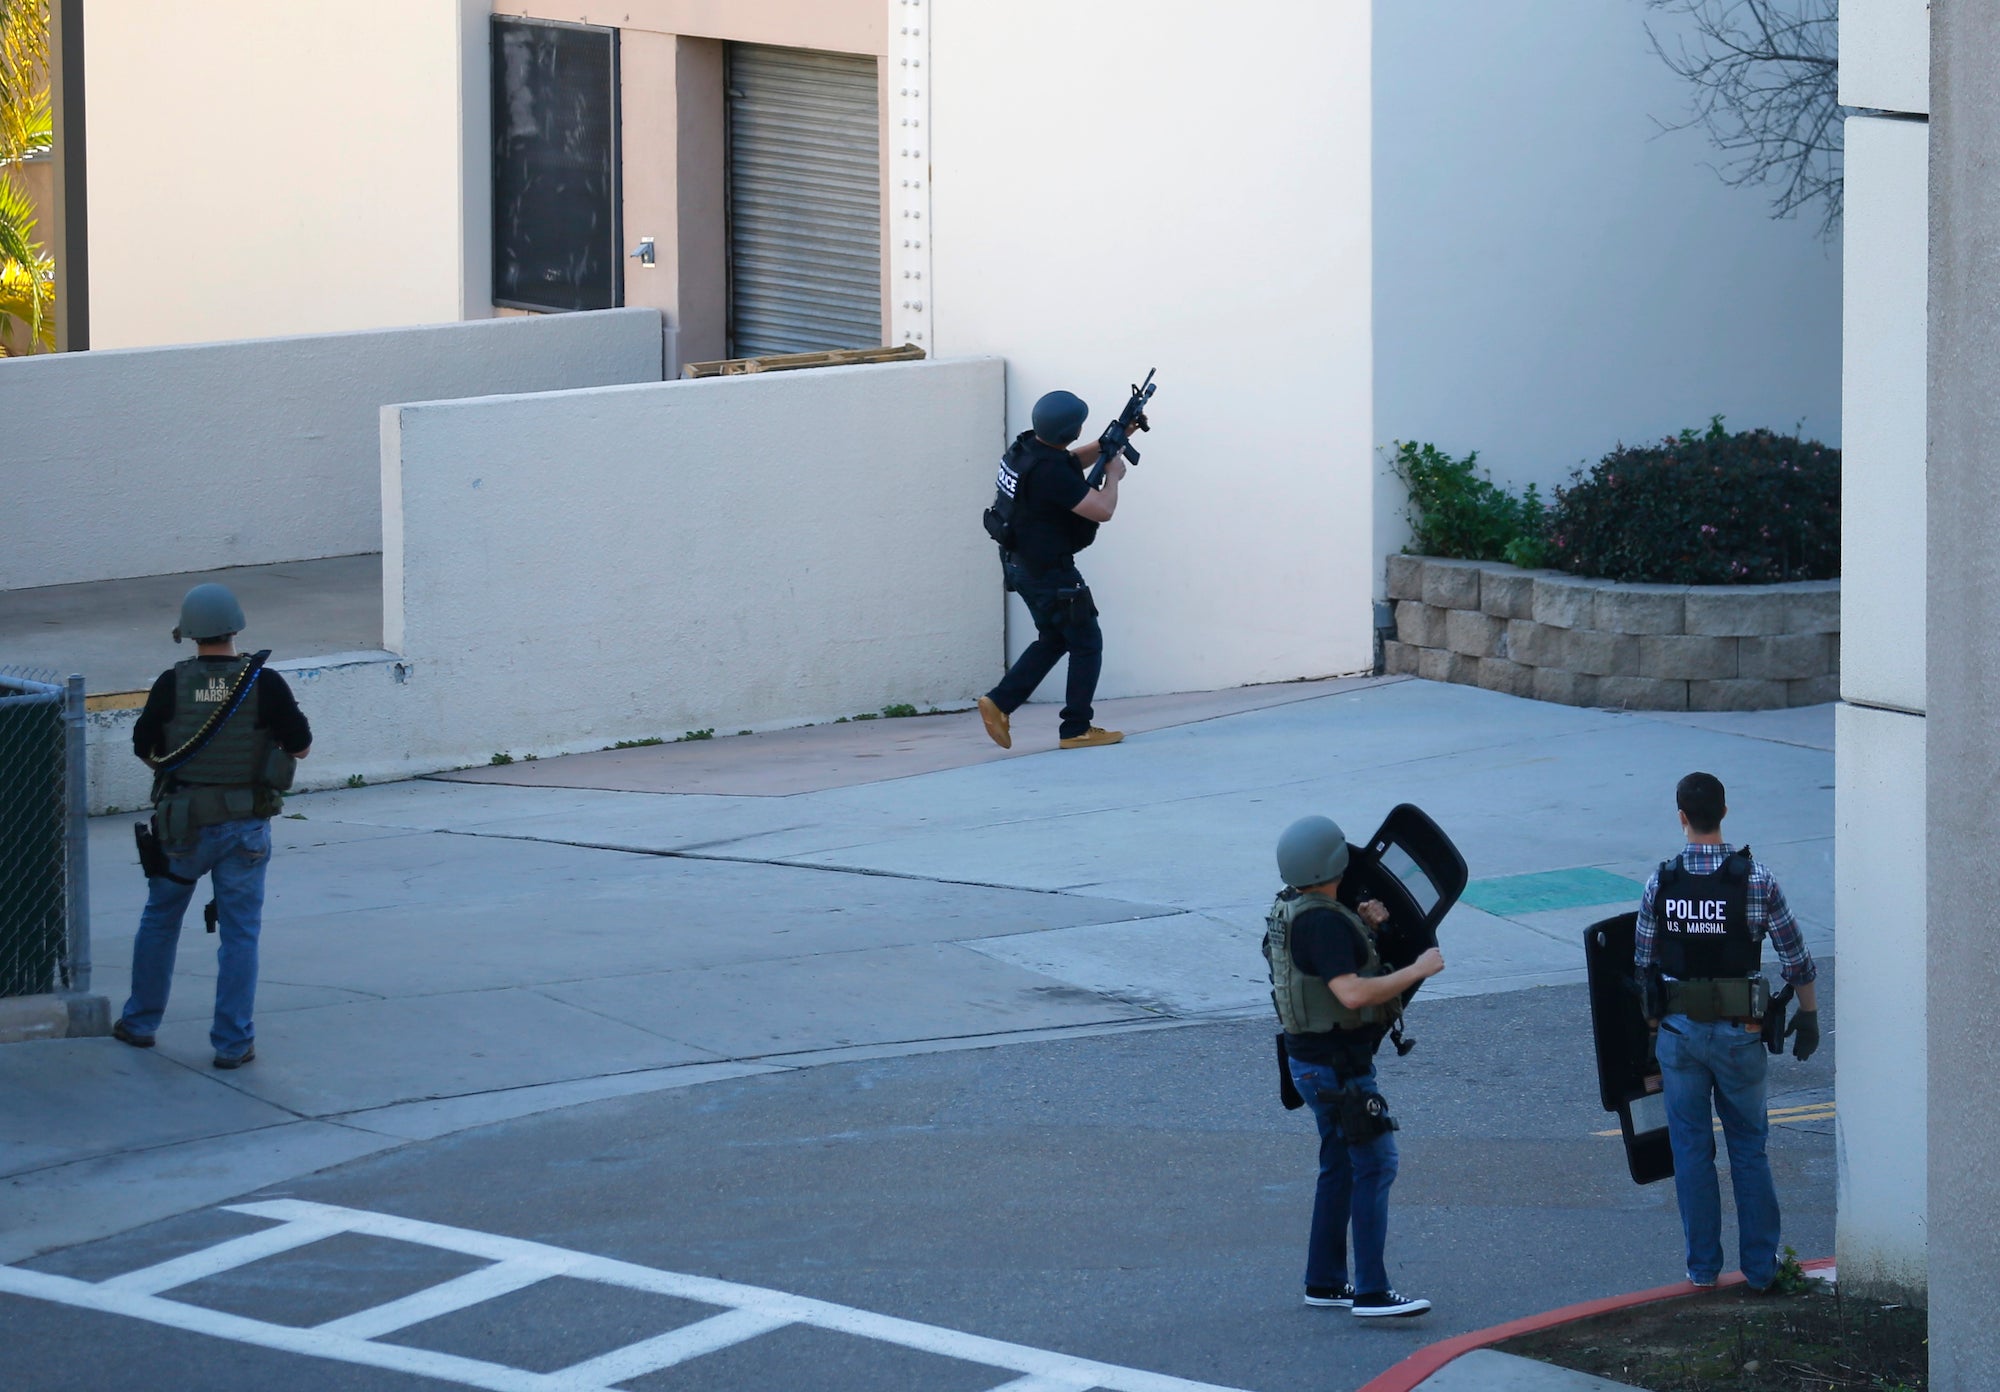 Navy personnel responds to reports of an active shooter situation at the Naval Medical Center in San Diego, California.